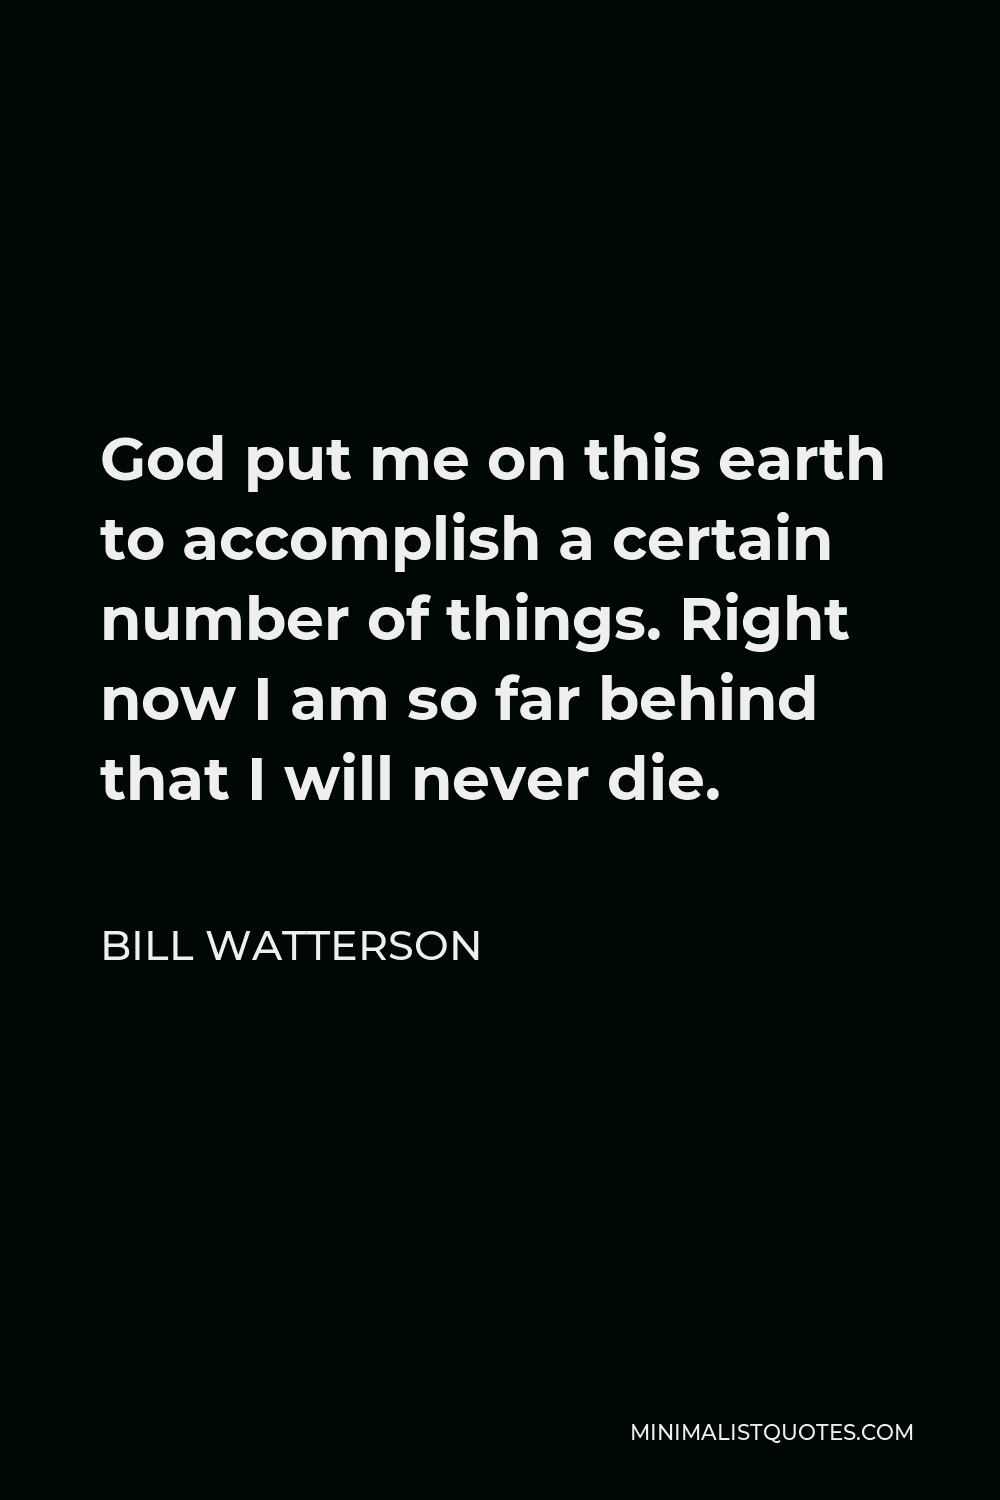 Bill Watterson Quote - God put me on this earth to accomplish a certain number of things. Right now I am so far behind that I will never die.